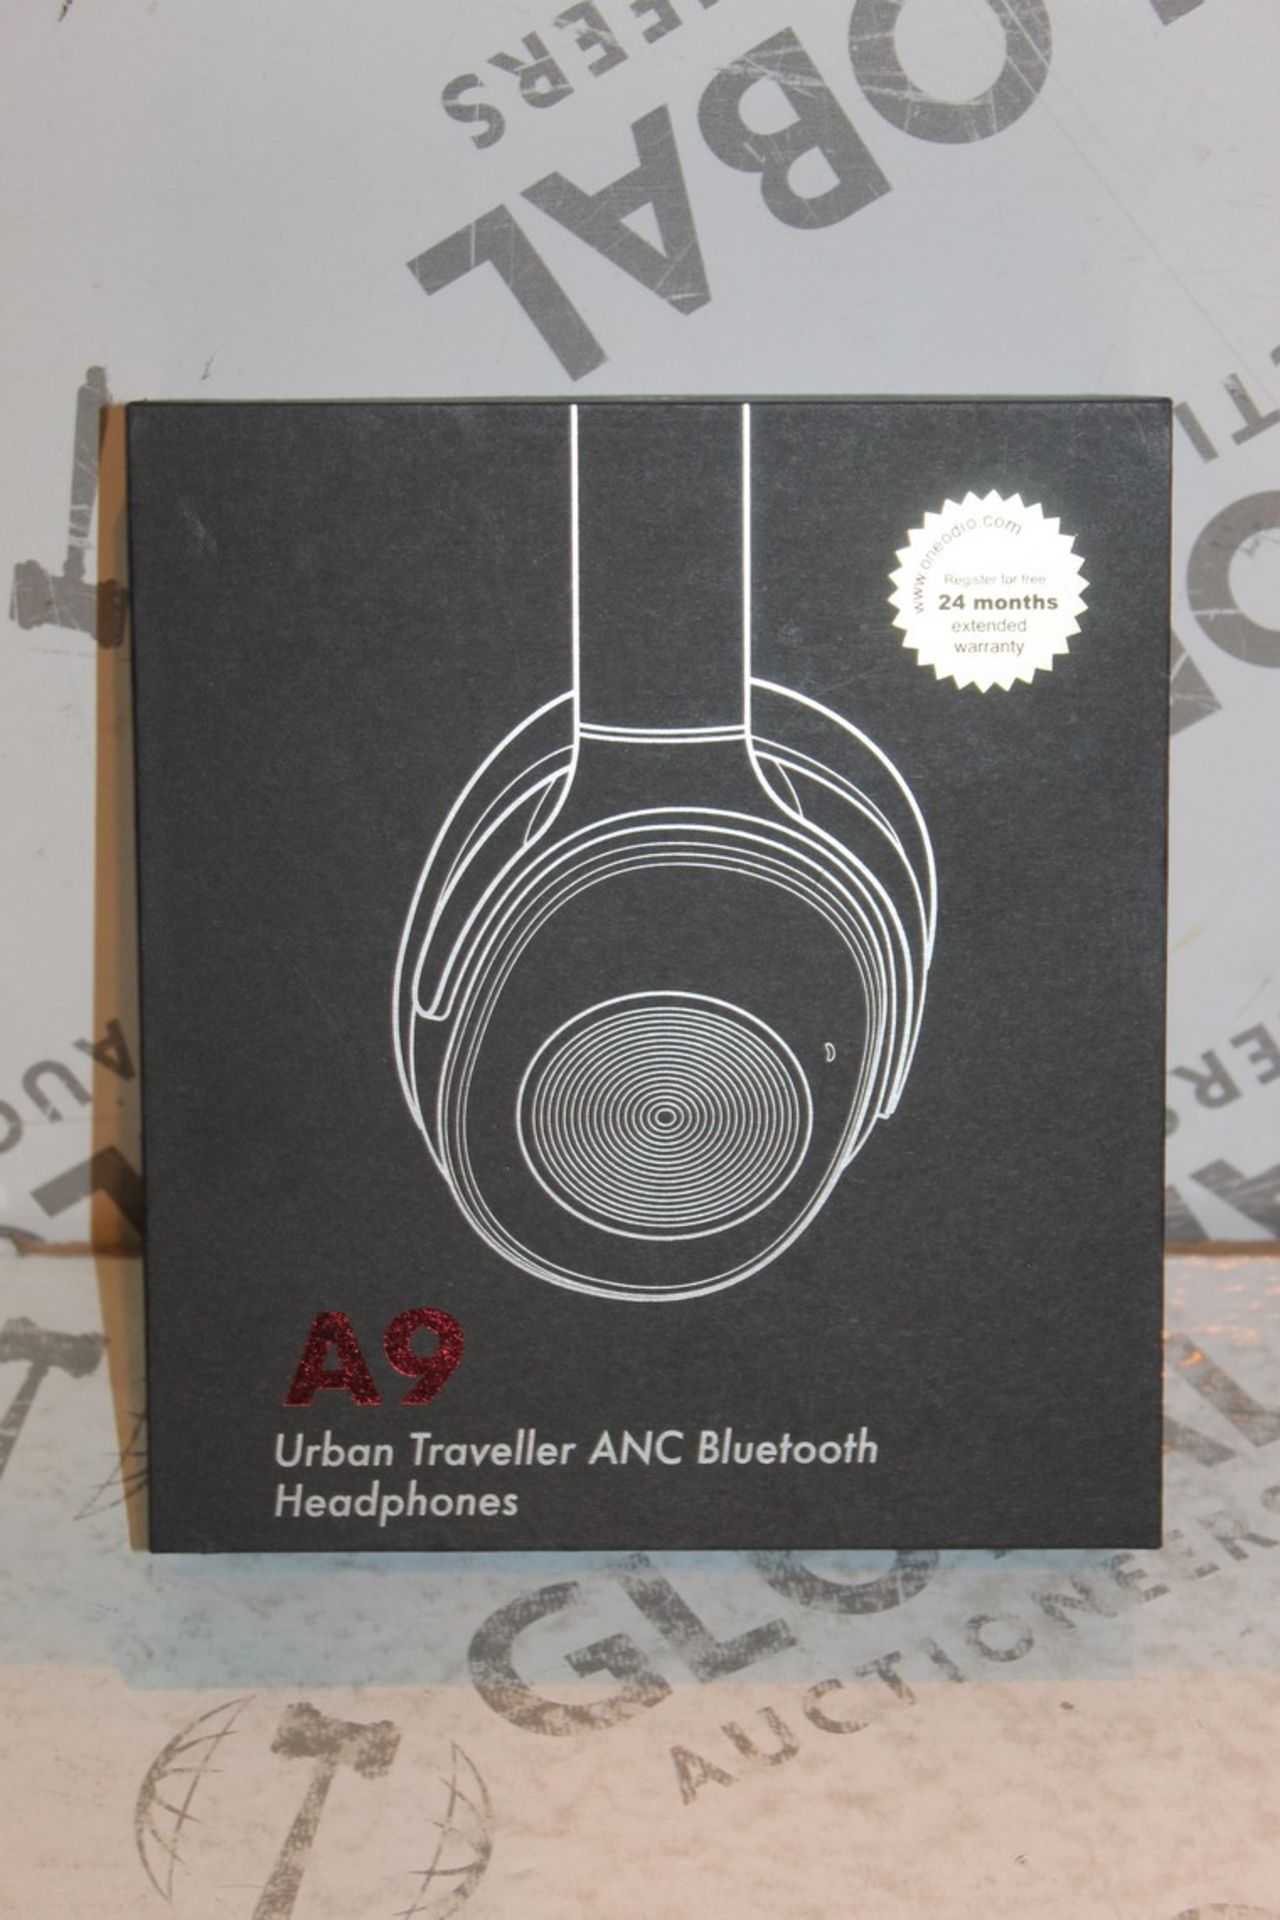 2 Boxed A9 Urban Traveller ANC Bluetooth Headphones Combined RRP £100